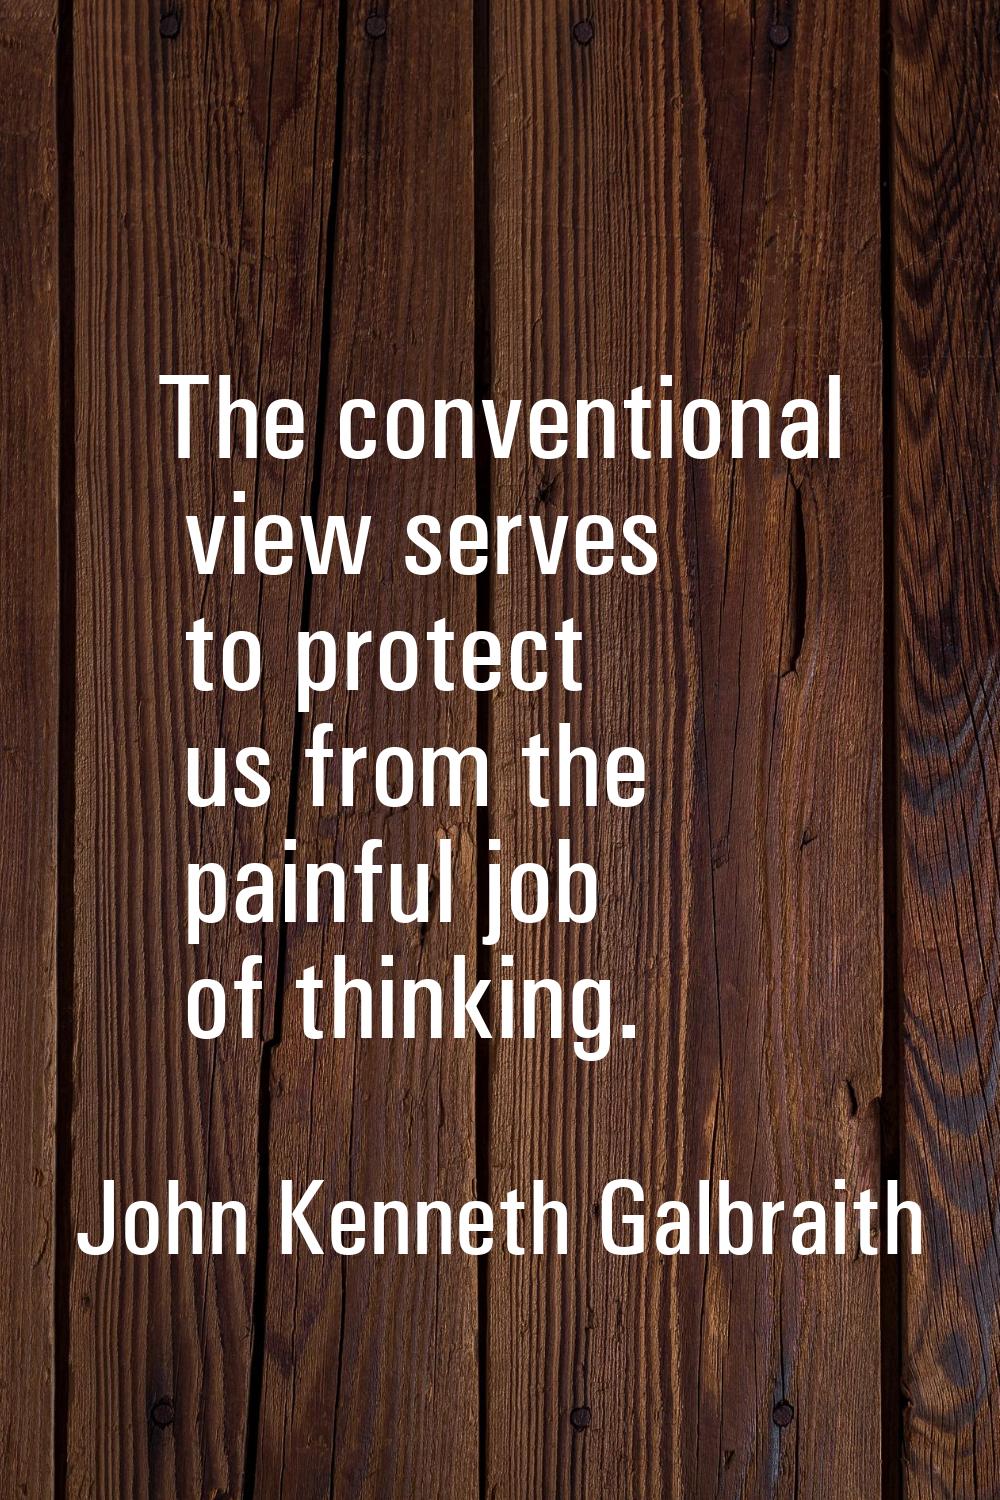 The conventional view serves to protect us from the painful job of thinking.